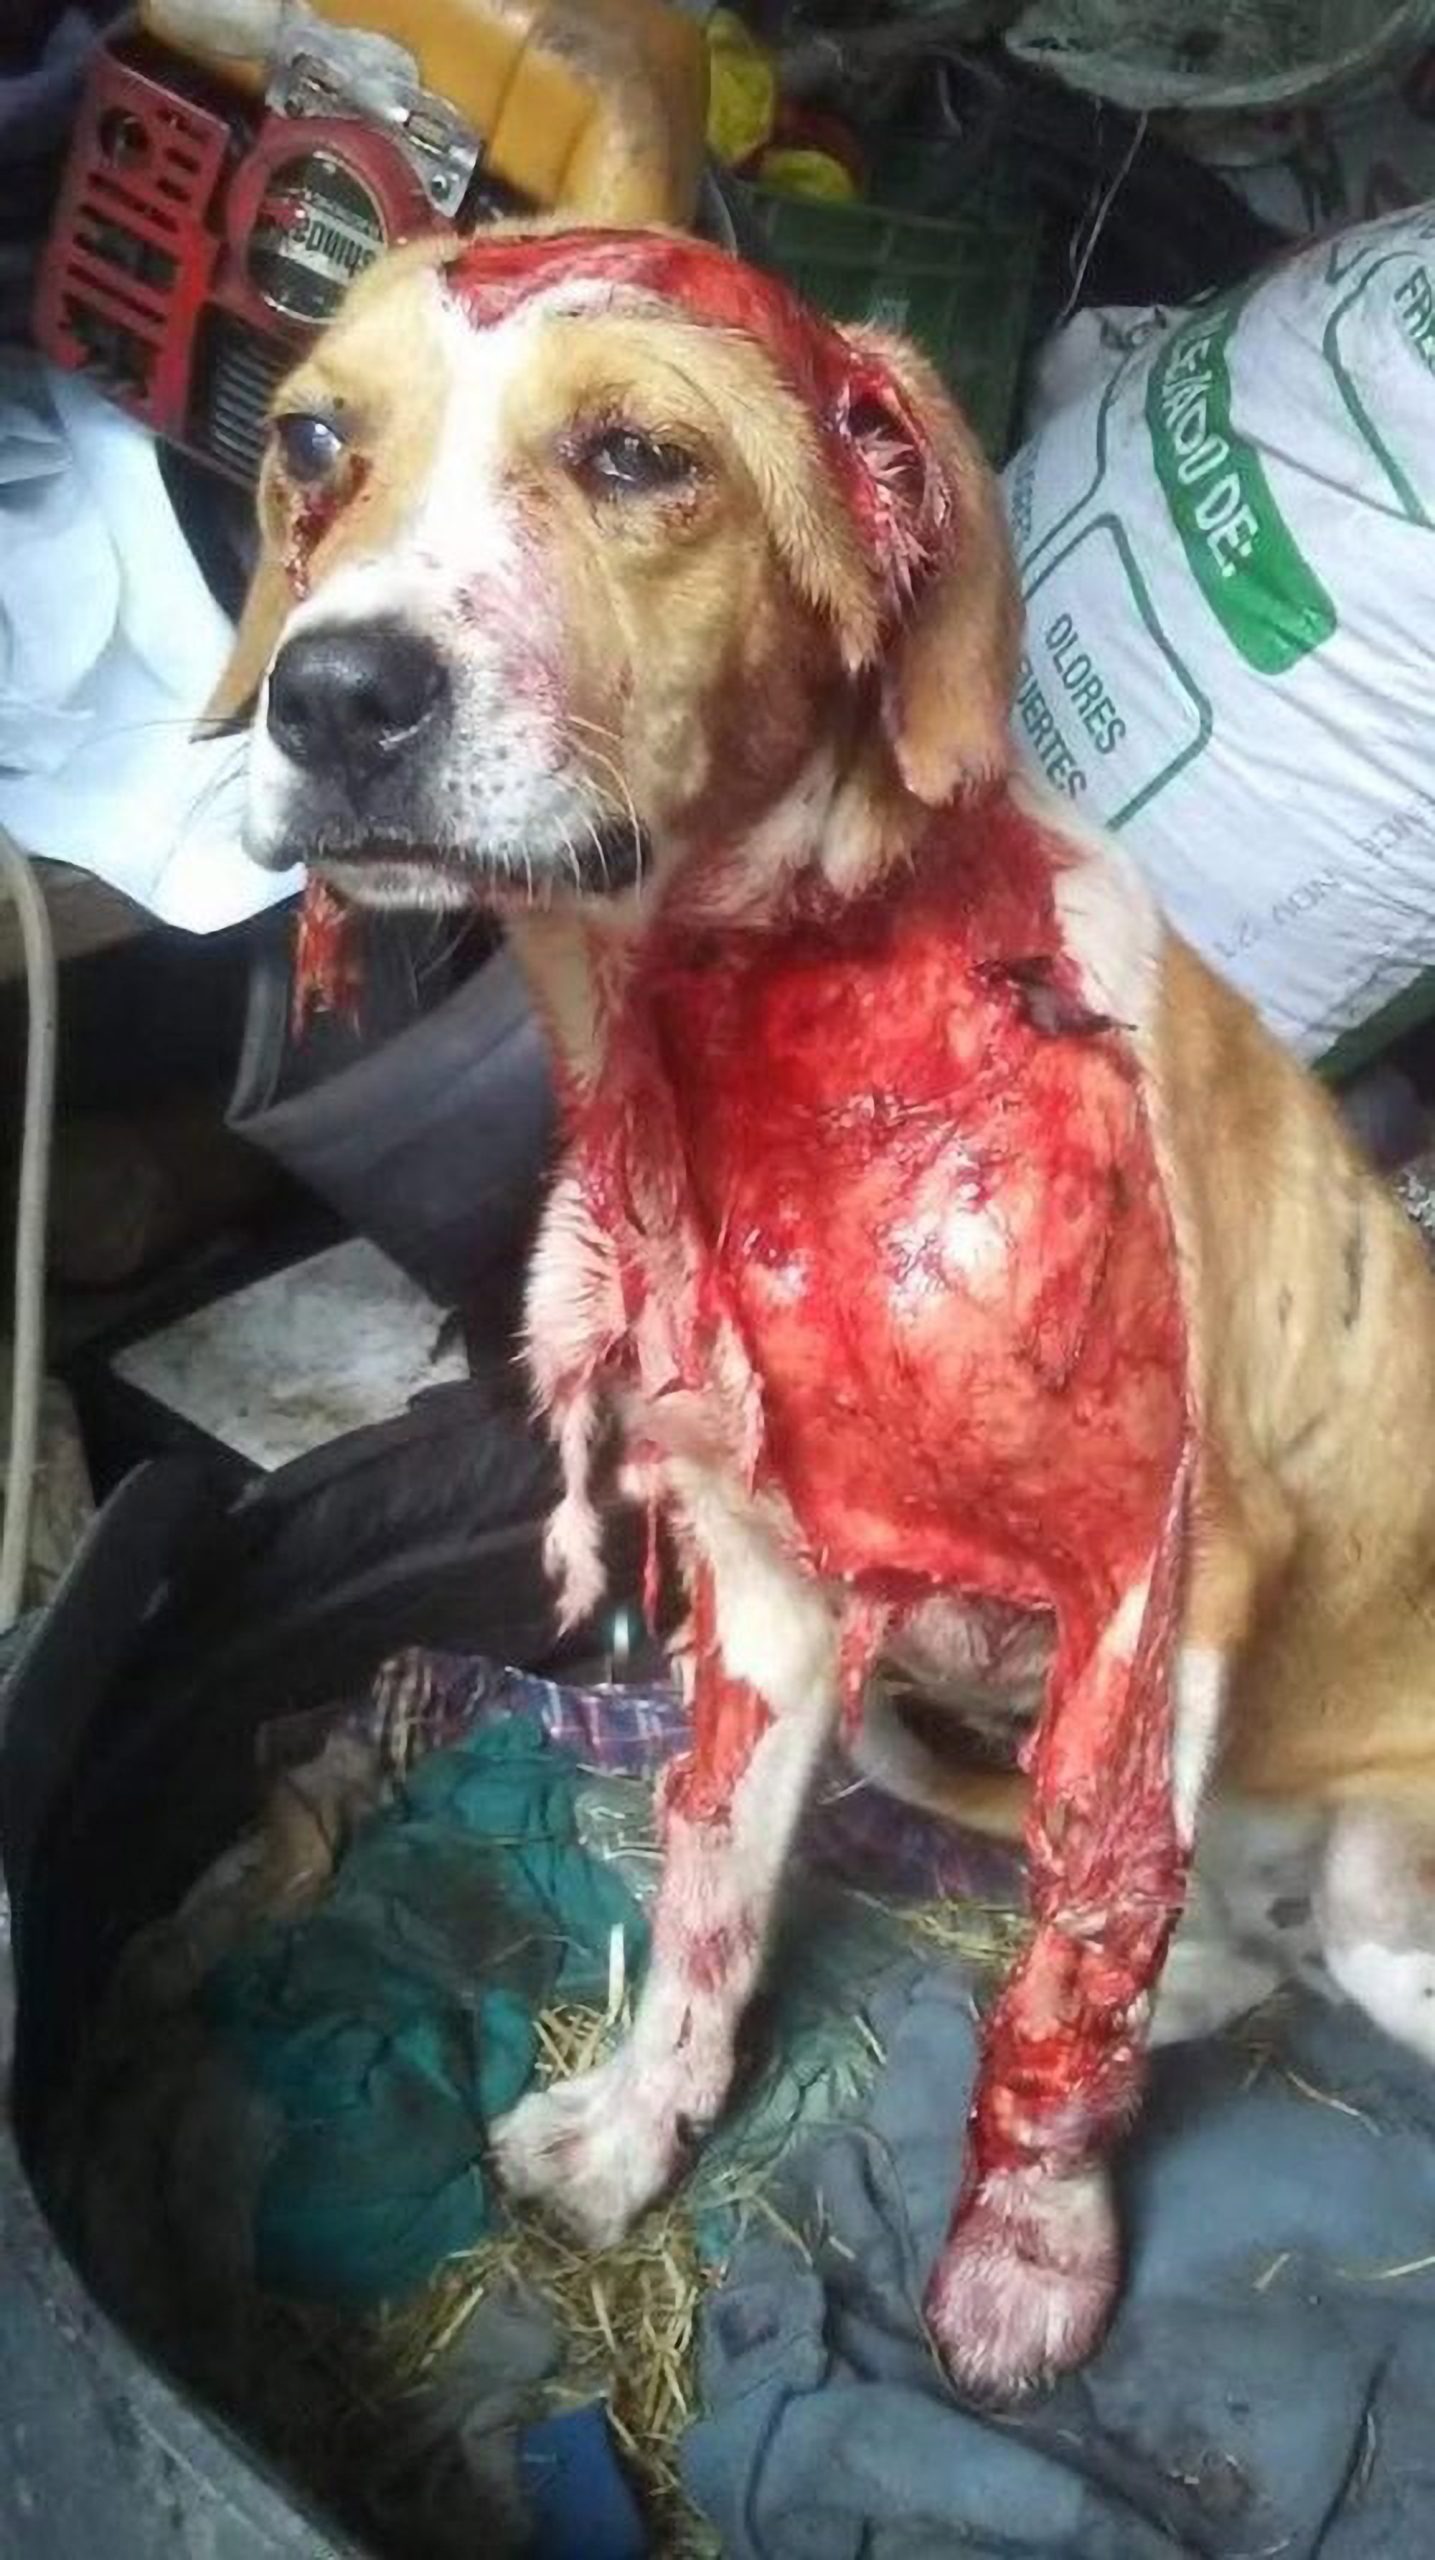 Read more about the article Pet Dog Survives Being Skinned Alive By Junkie In Sick Attack That Affected 80 Percent Of Its Body